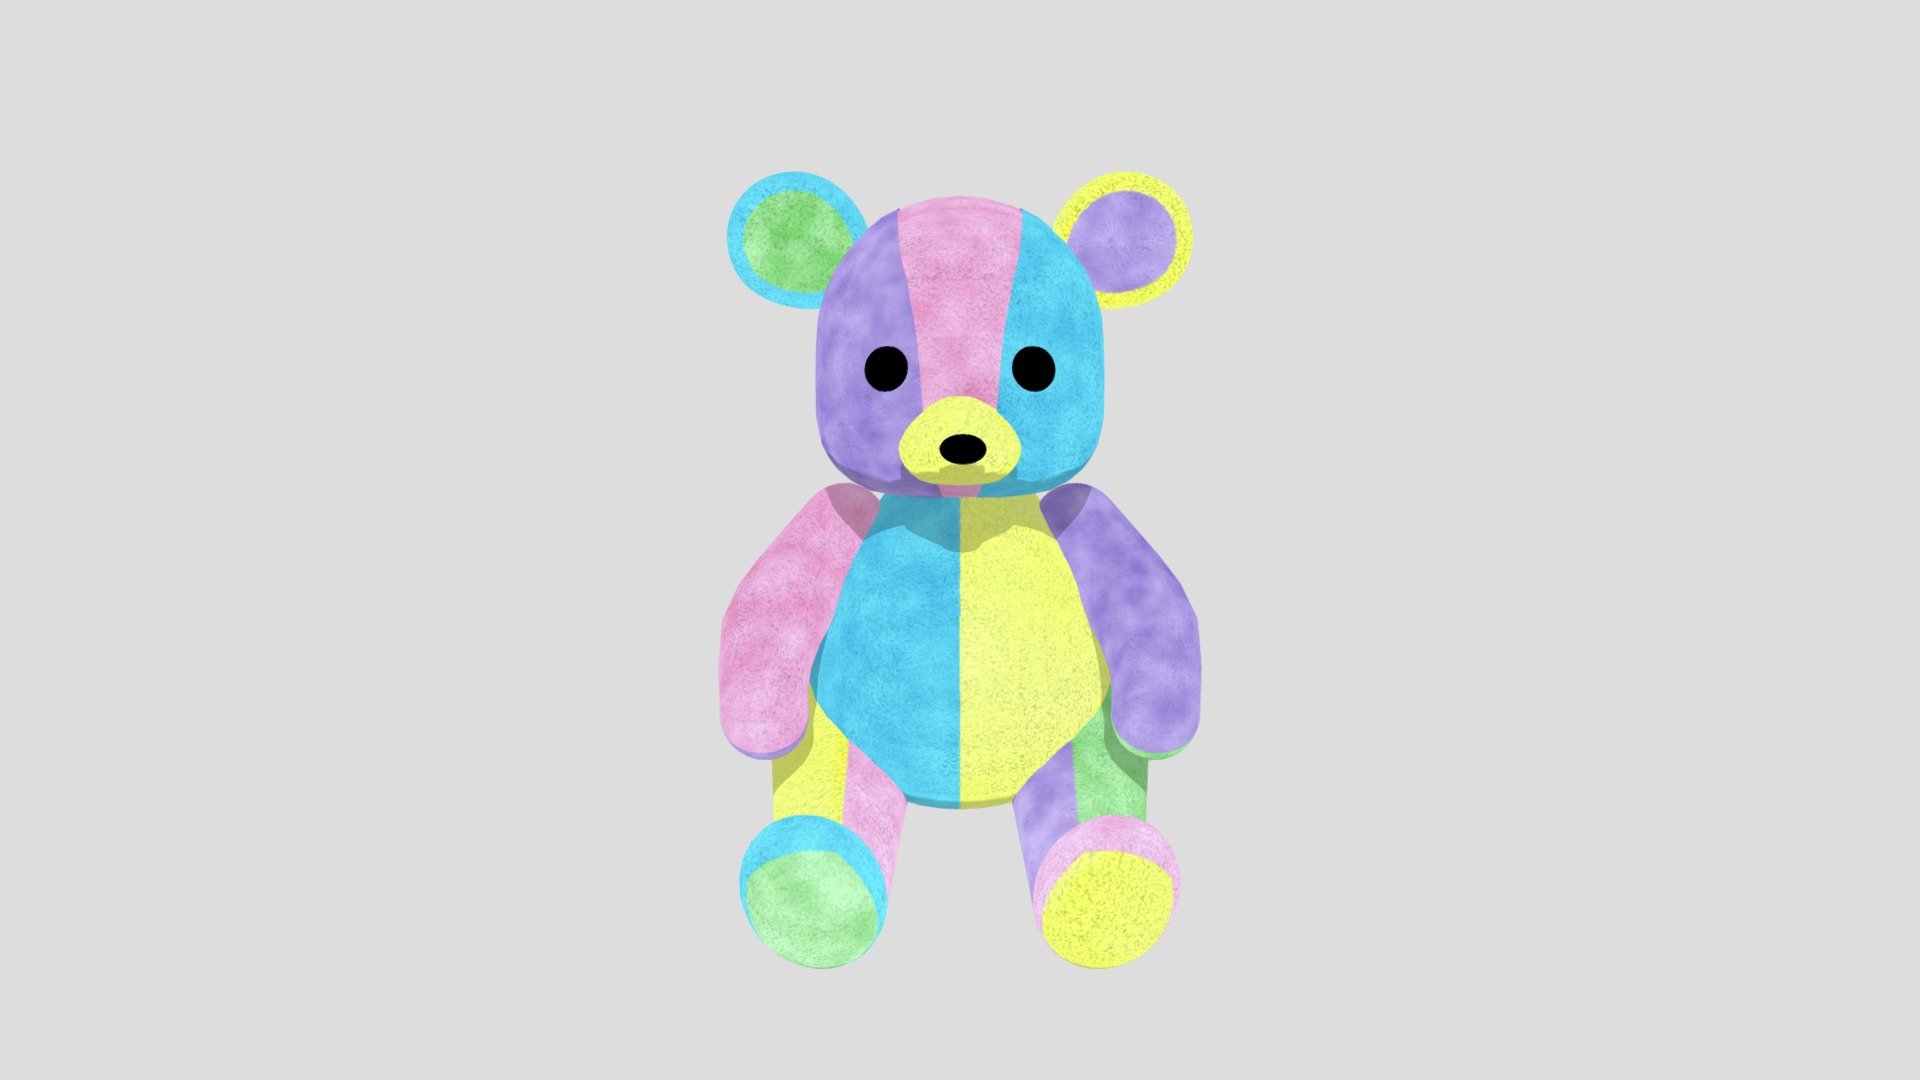 Static fuzzy teddy bear
Unfortunately I still don't know how to make materials show up on Sketchfab the way they look in other programs - Pastel Teddy Bear - 3D model by sparklewolfie 3d model